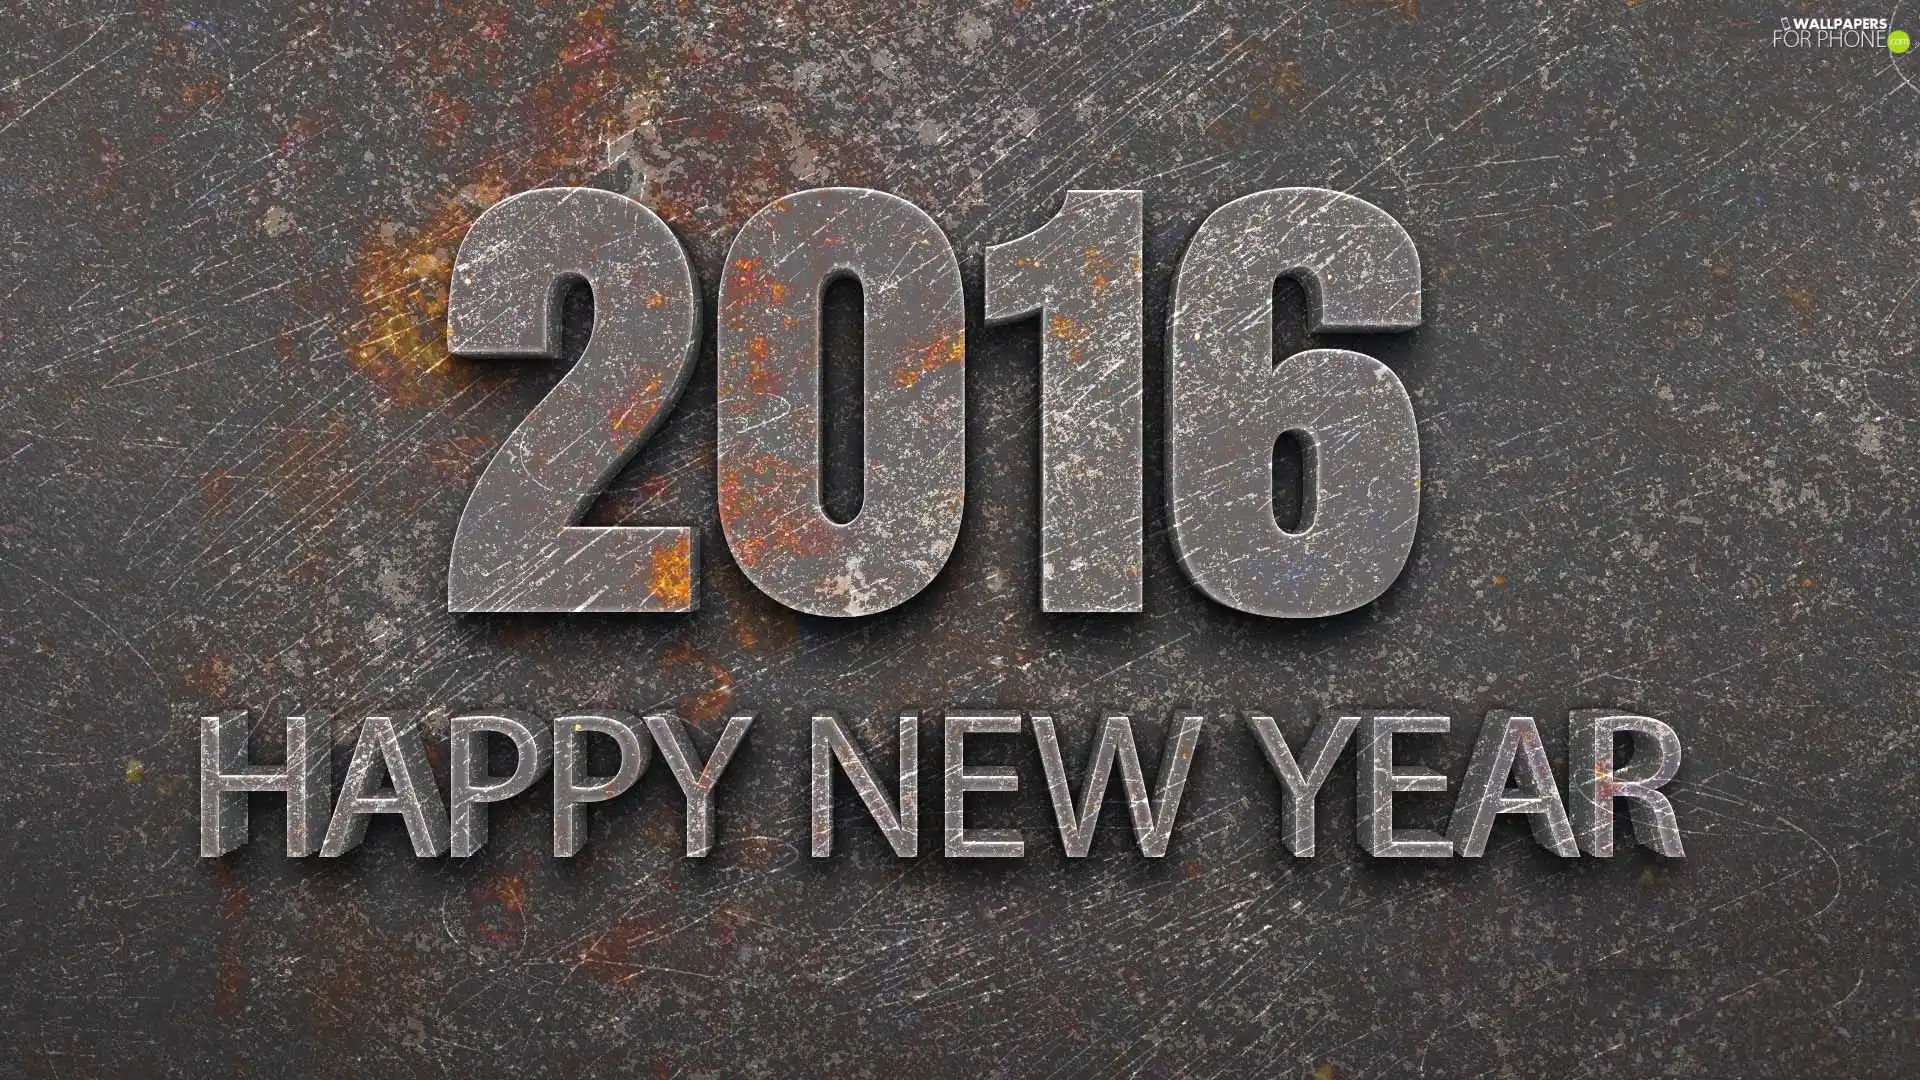 stone, text, 2016, HAPPY, Year, 3D, graphics, New